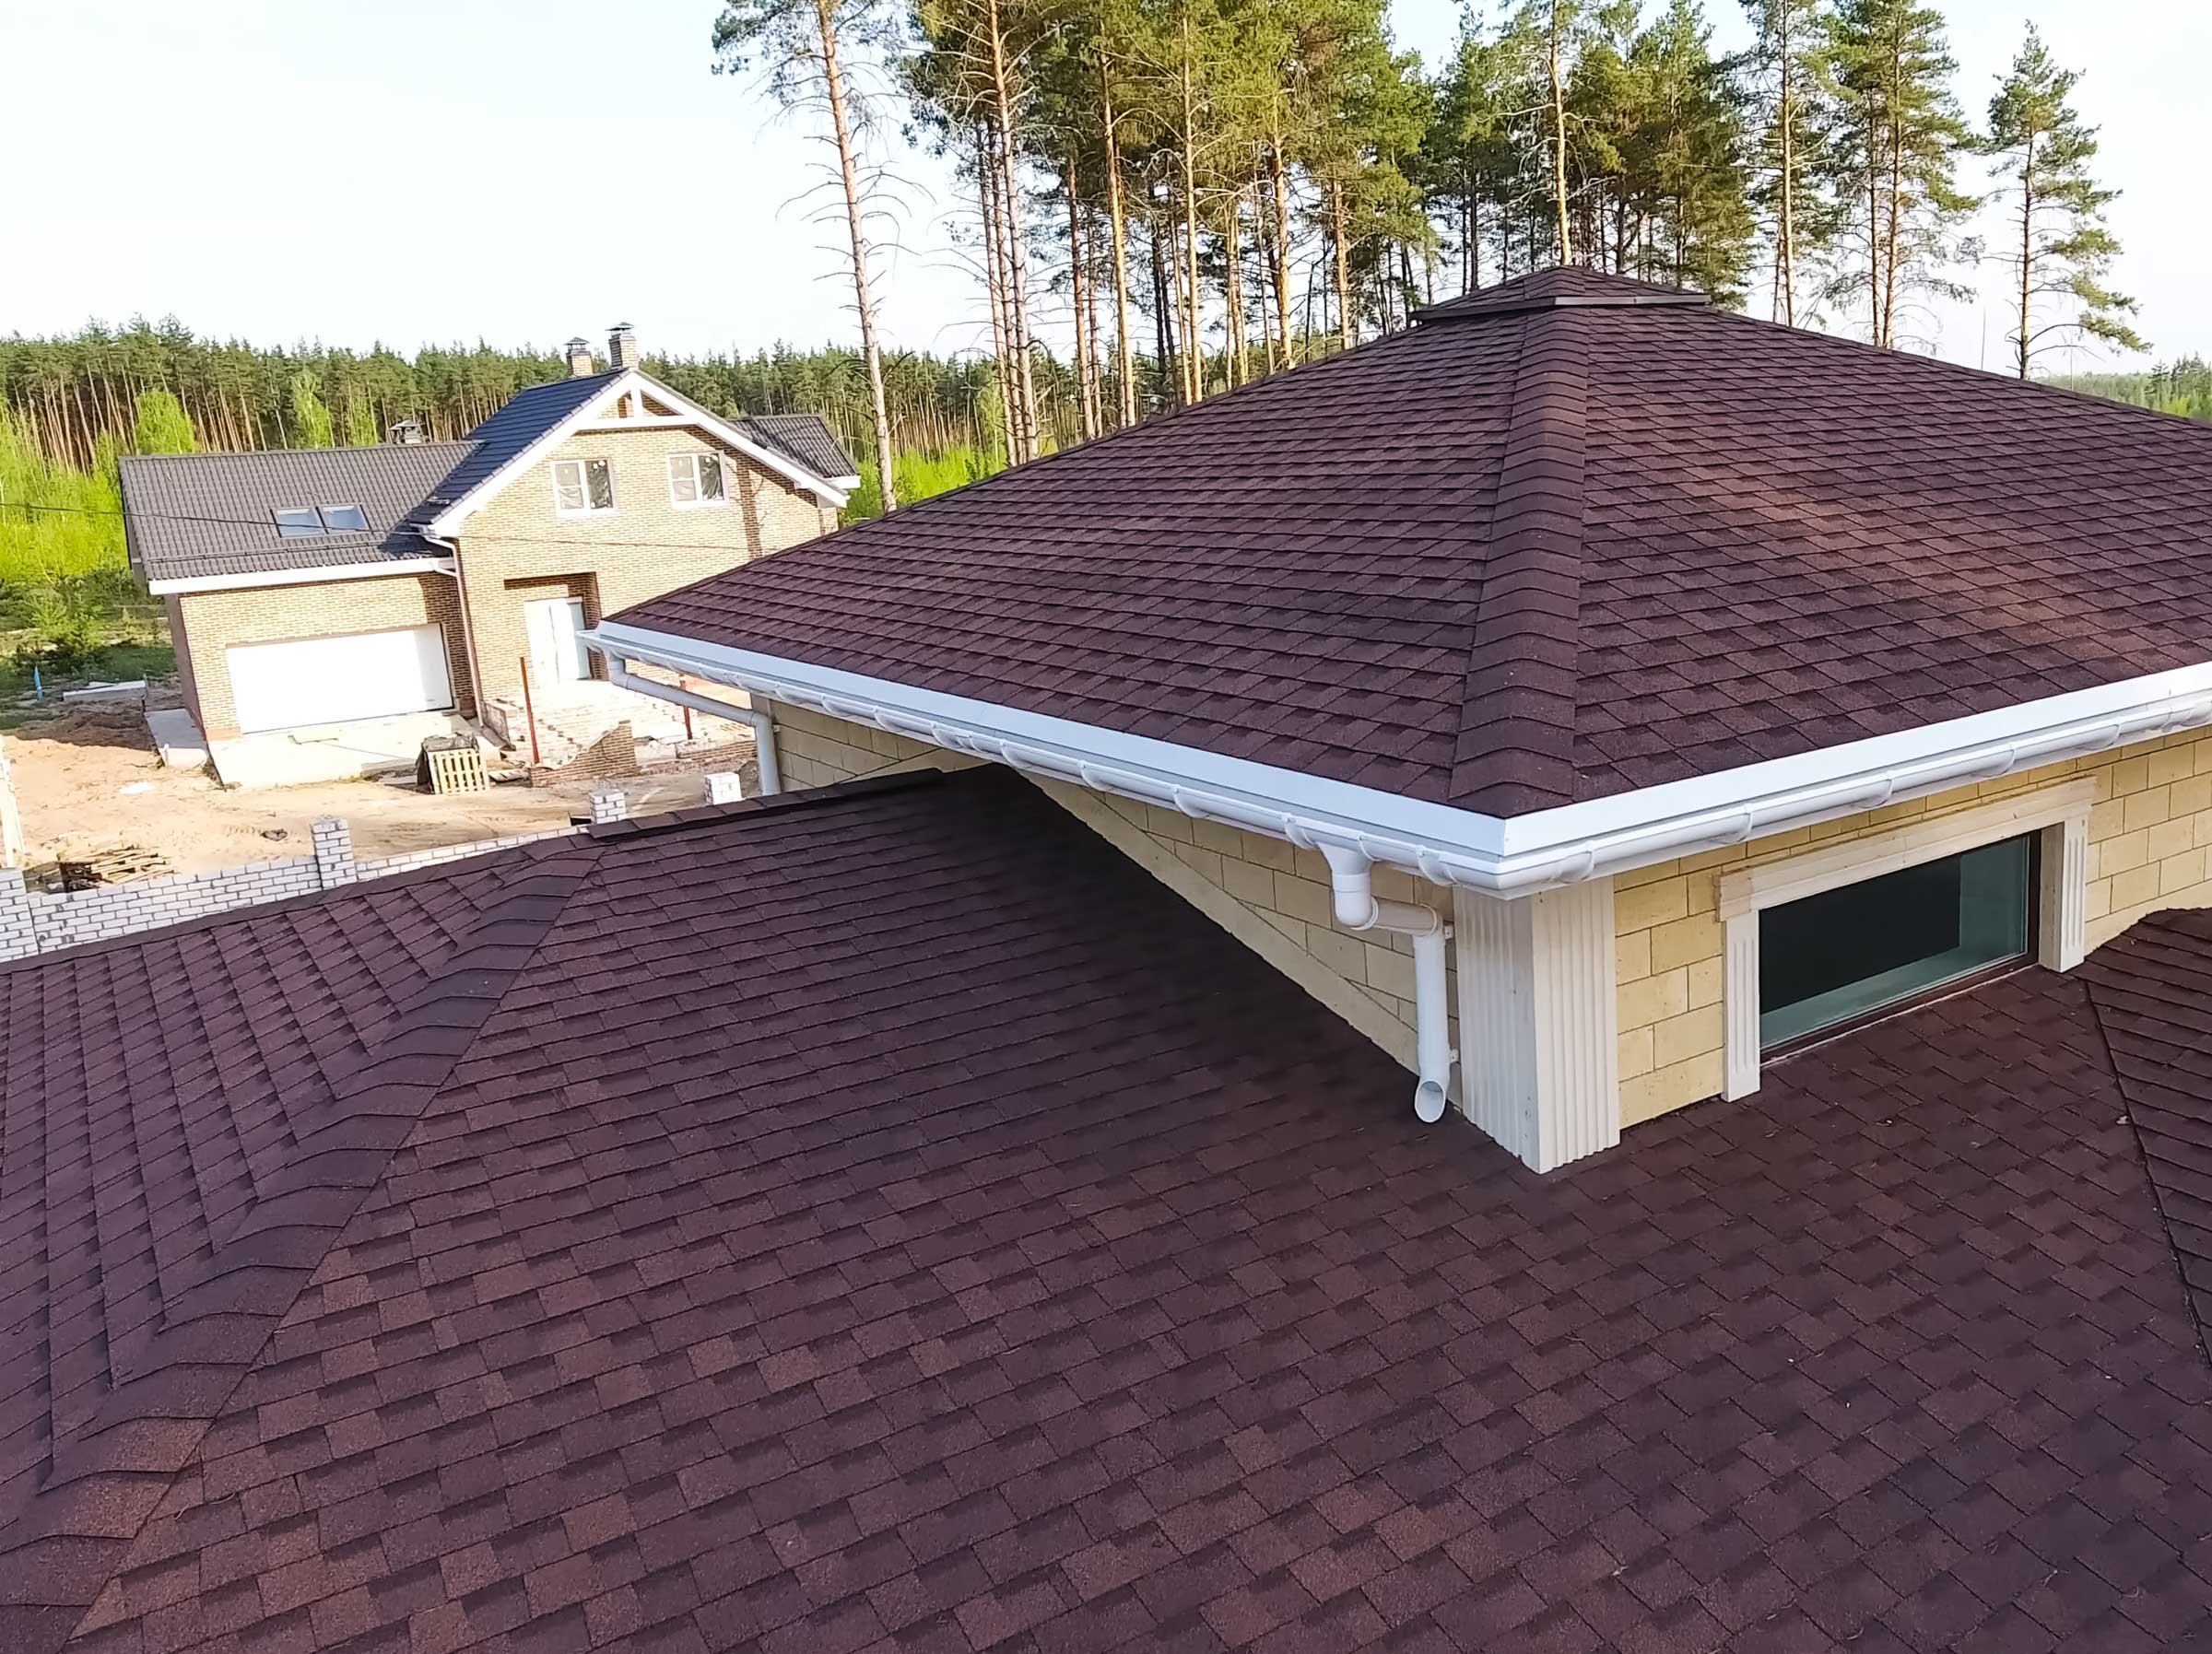 Trusted Local Roofing Contractor in Leesburg, FL